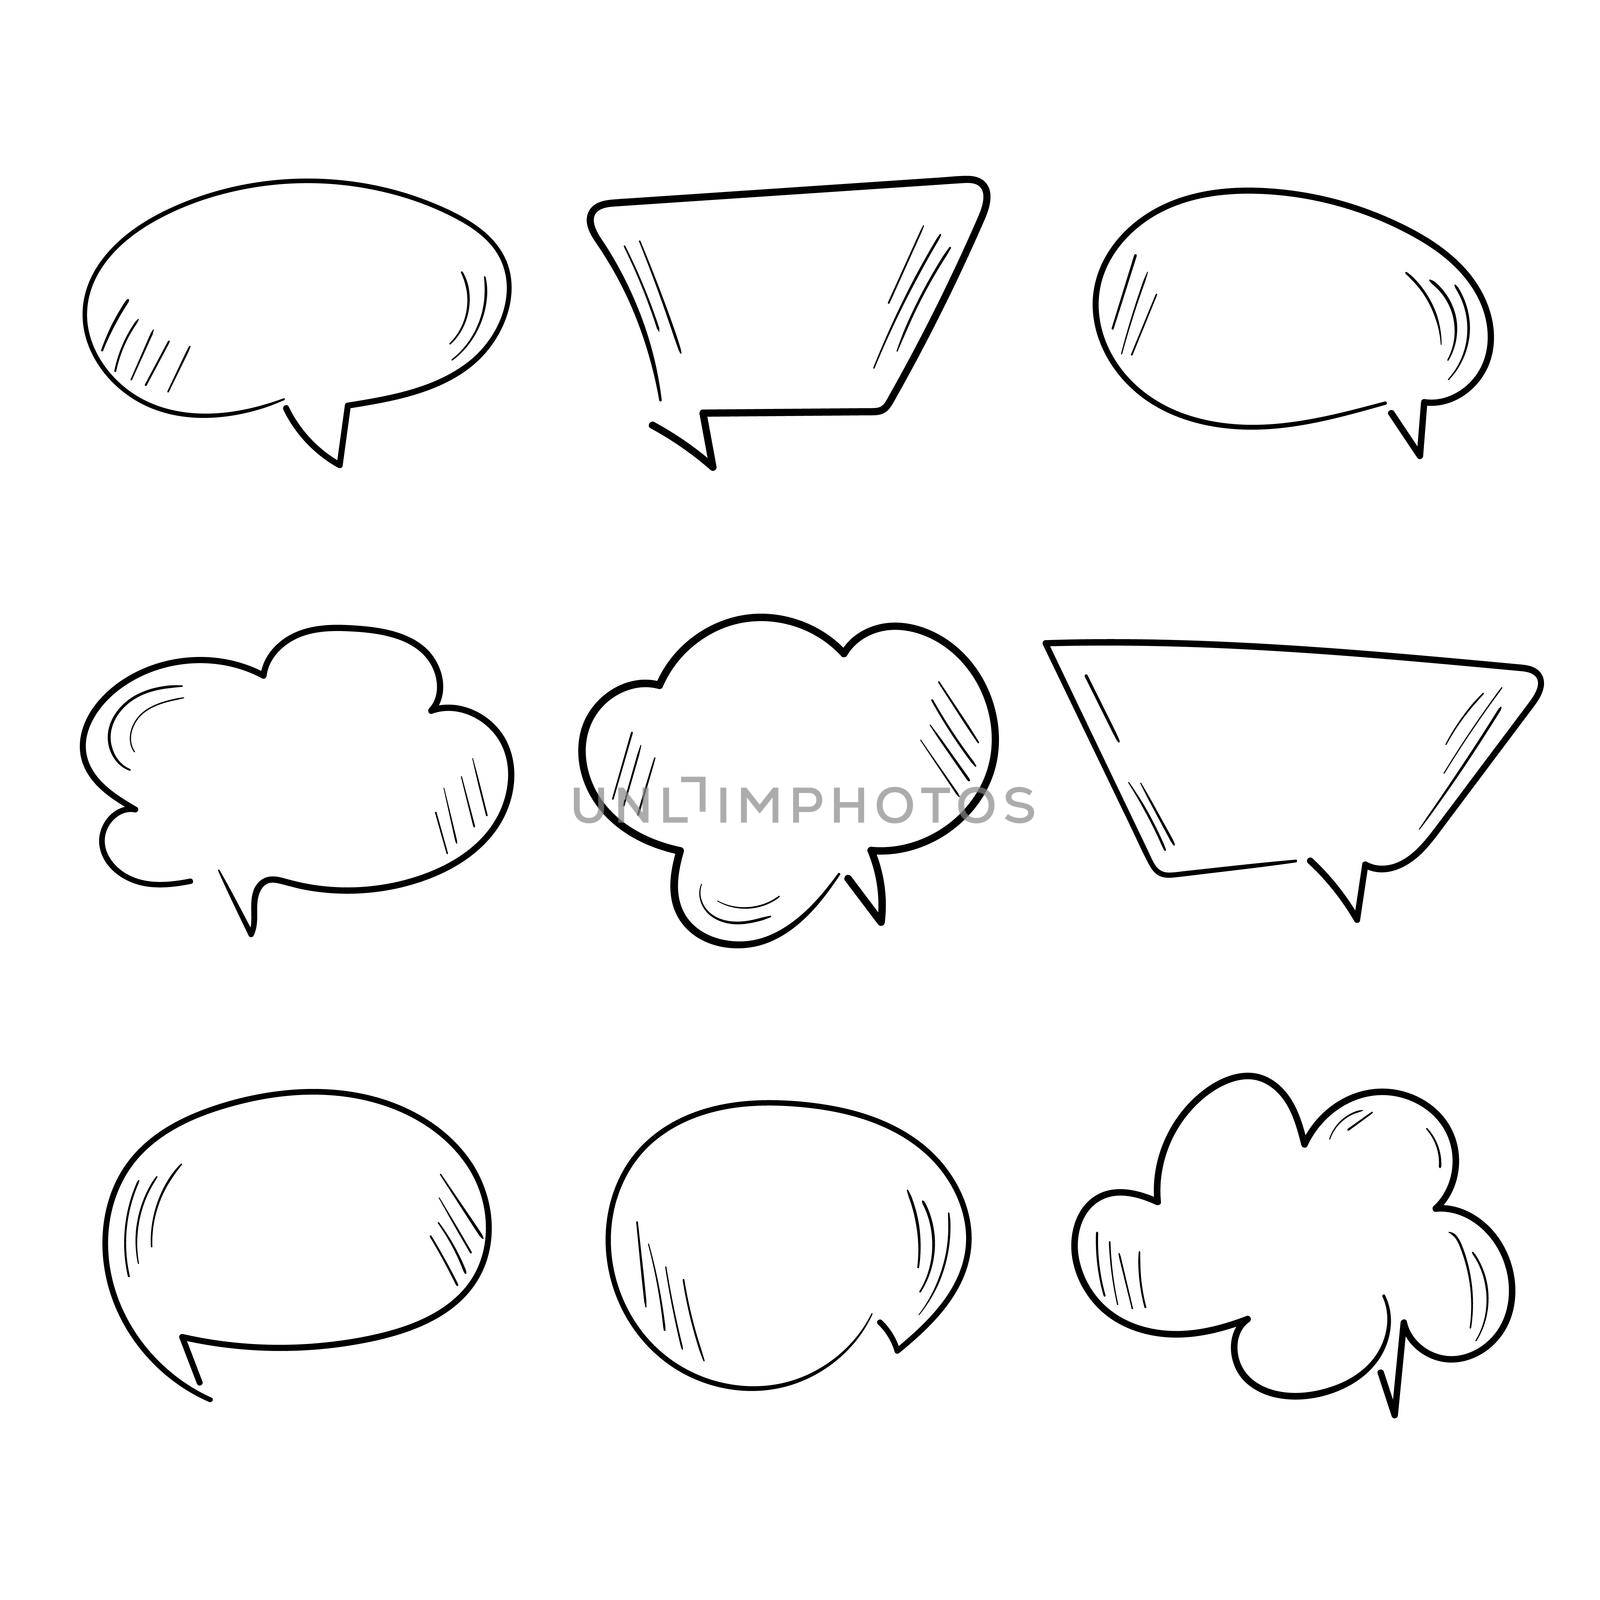 Blank dialog balloon for speech or conversation. Comic style hand drawn vector by natali_brill